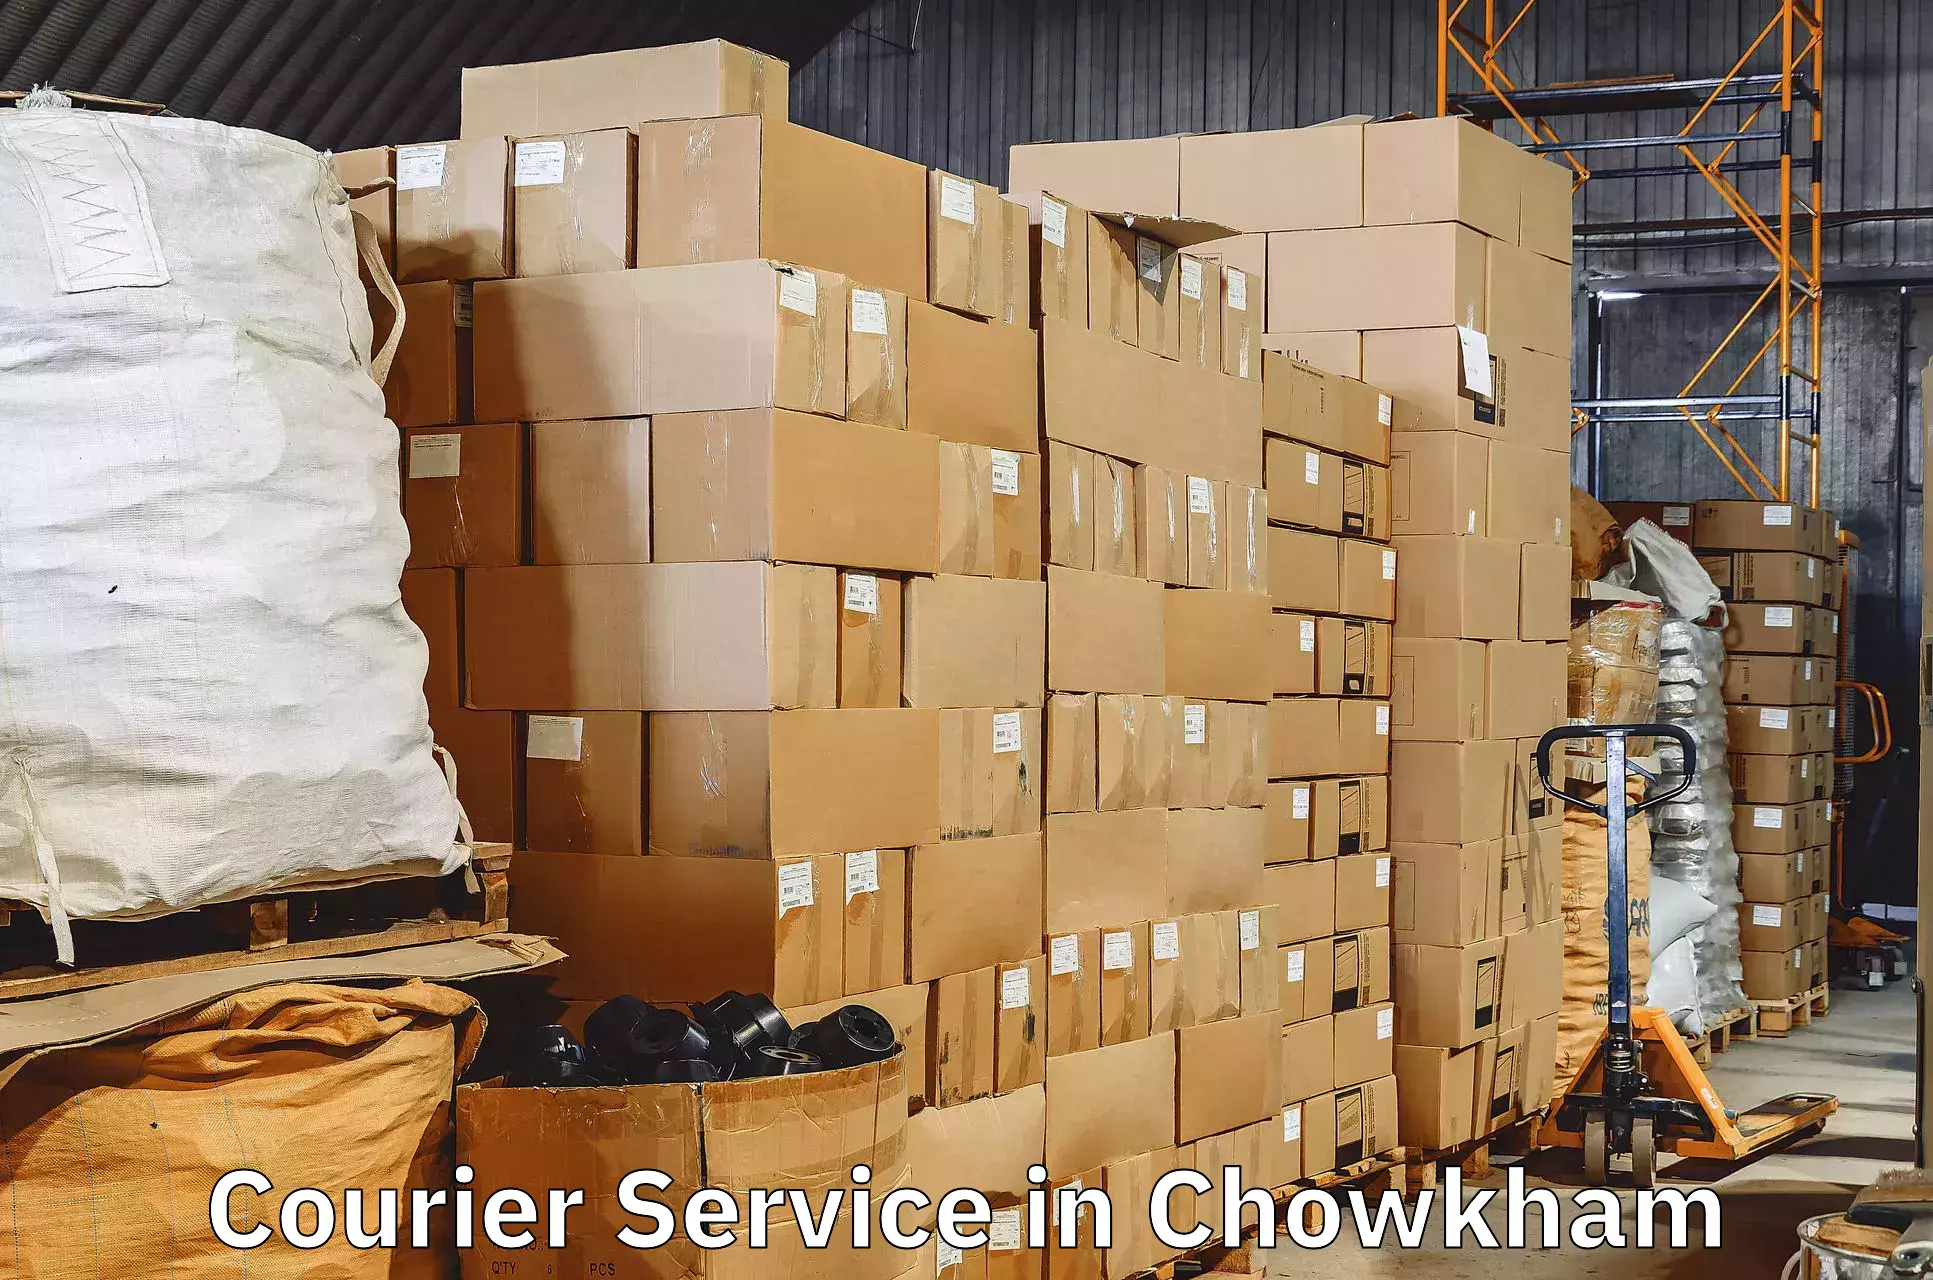 International shipping rates in Chowkham